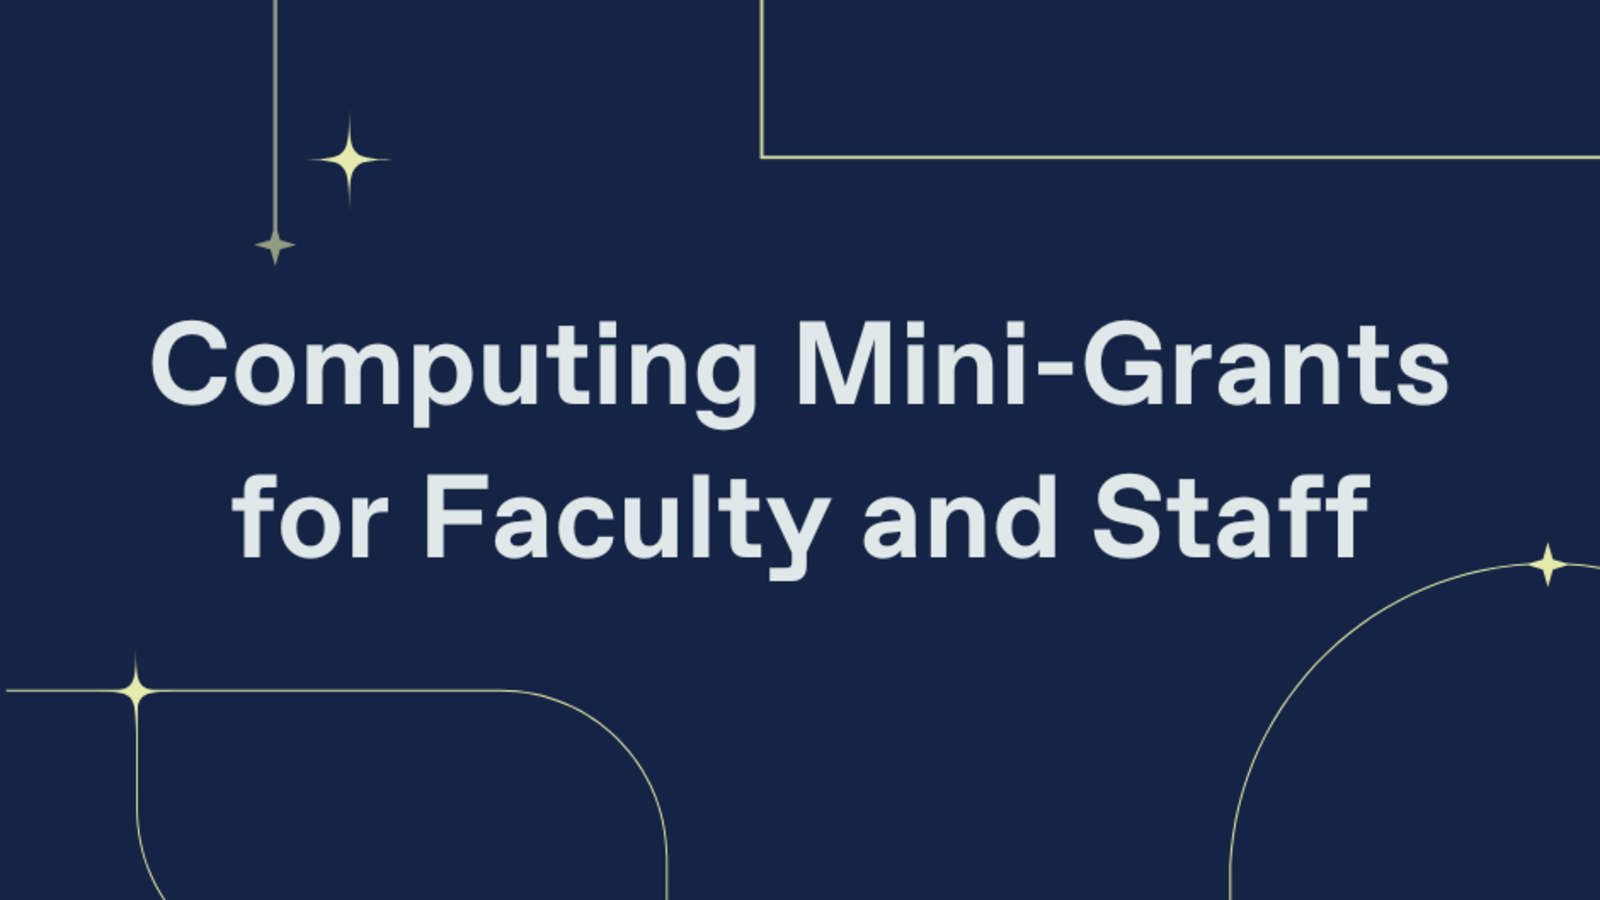 Navy background with stars, title reads "Computing Mini-Grants for Faculty and Staff"